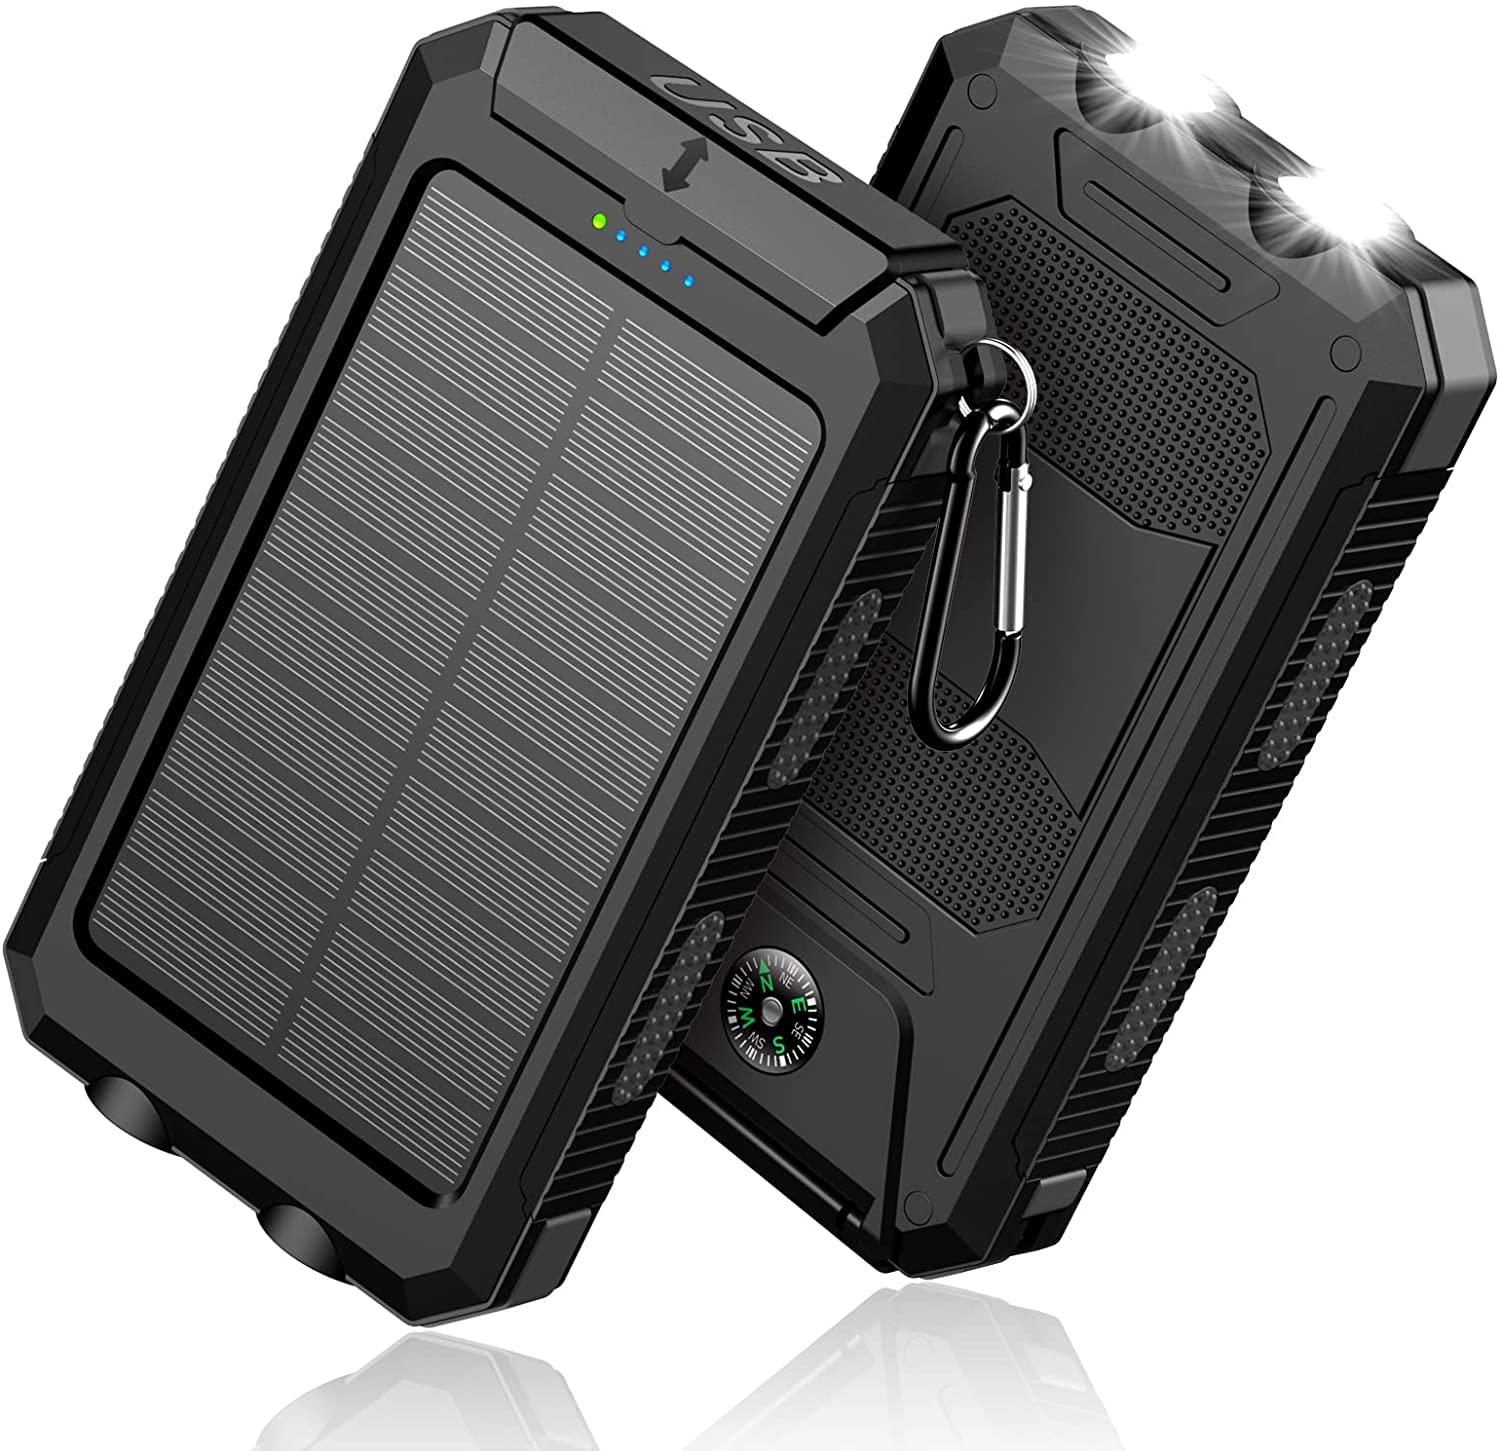 Feeke Solar-Charger-Power-Bank - 36800mAh Portable Charger,QC3.0 Fast Charger Dual USB Port Built-in Led Flashlight and Compass for All Cell Phone and Electronic Devices(Deep Black)